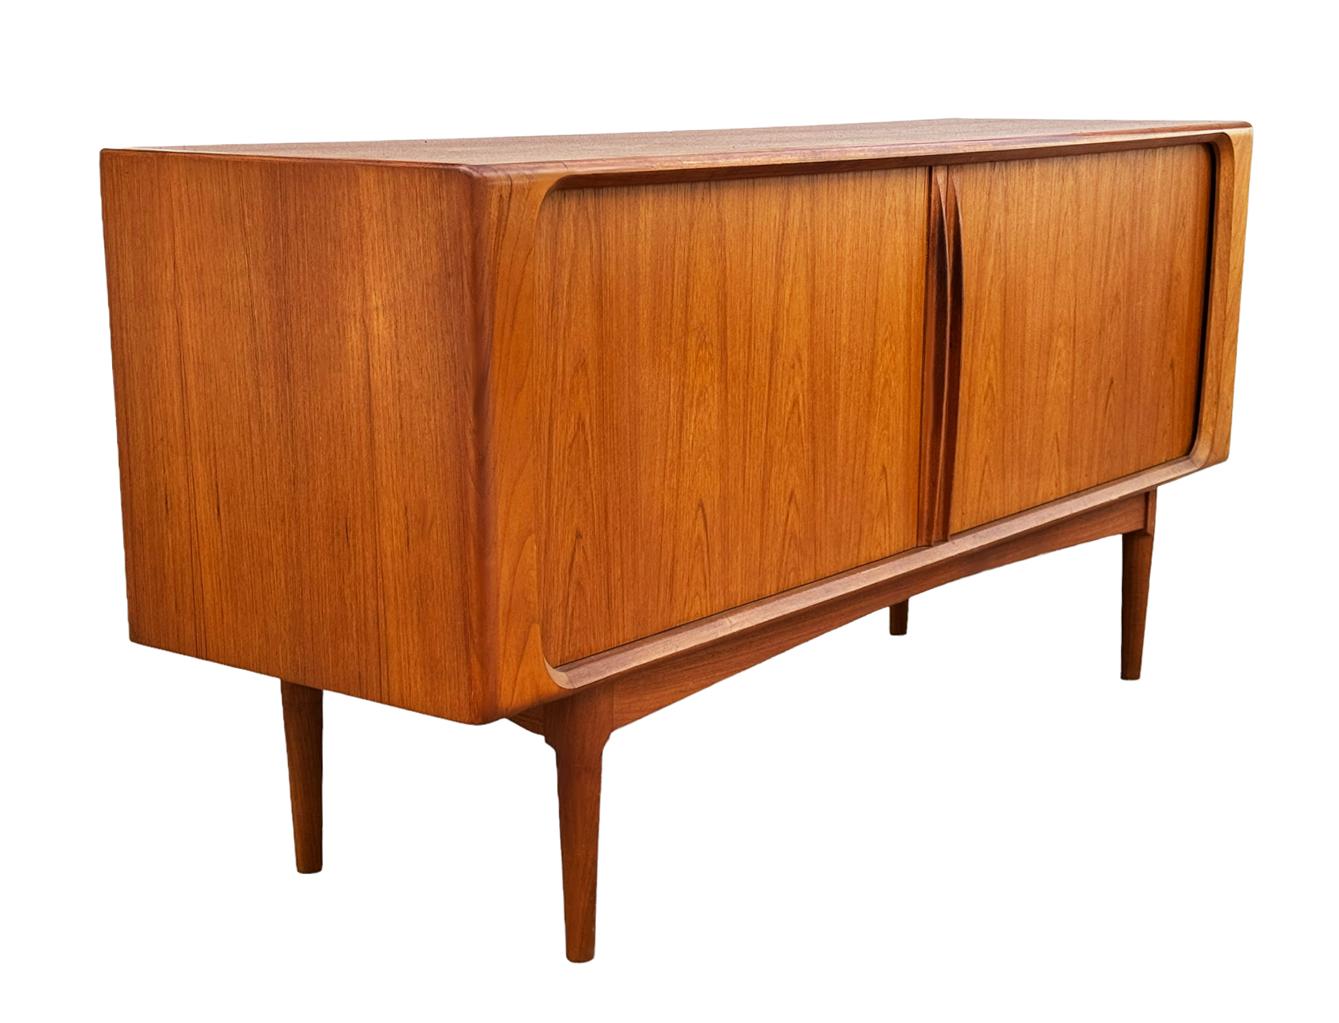 A lovely and teak credenza Model 142 produced by Bernhard Pedersen & Son in the 1960s. This cabinet is very clean and has ample storage. Doors and drawers work as they should. Ready for immediate use.